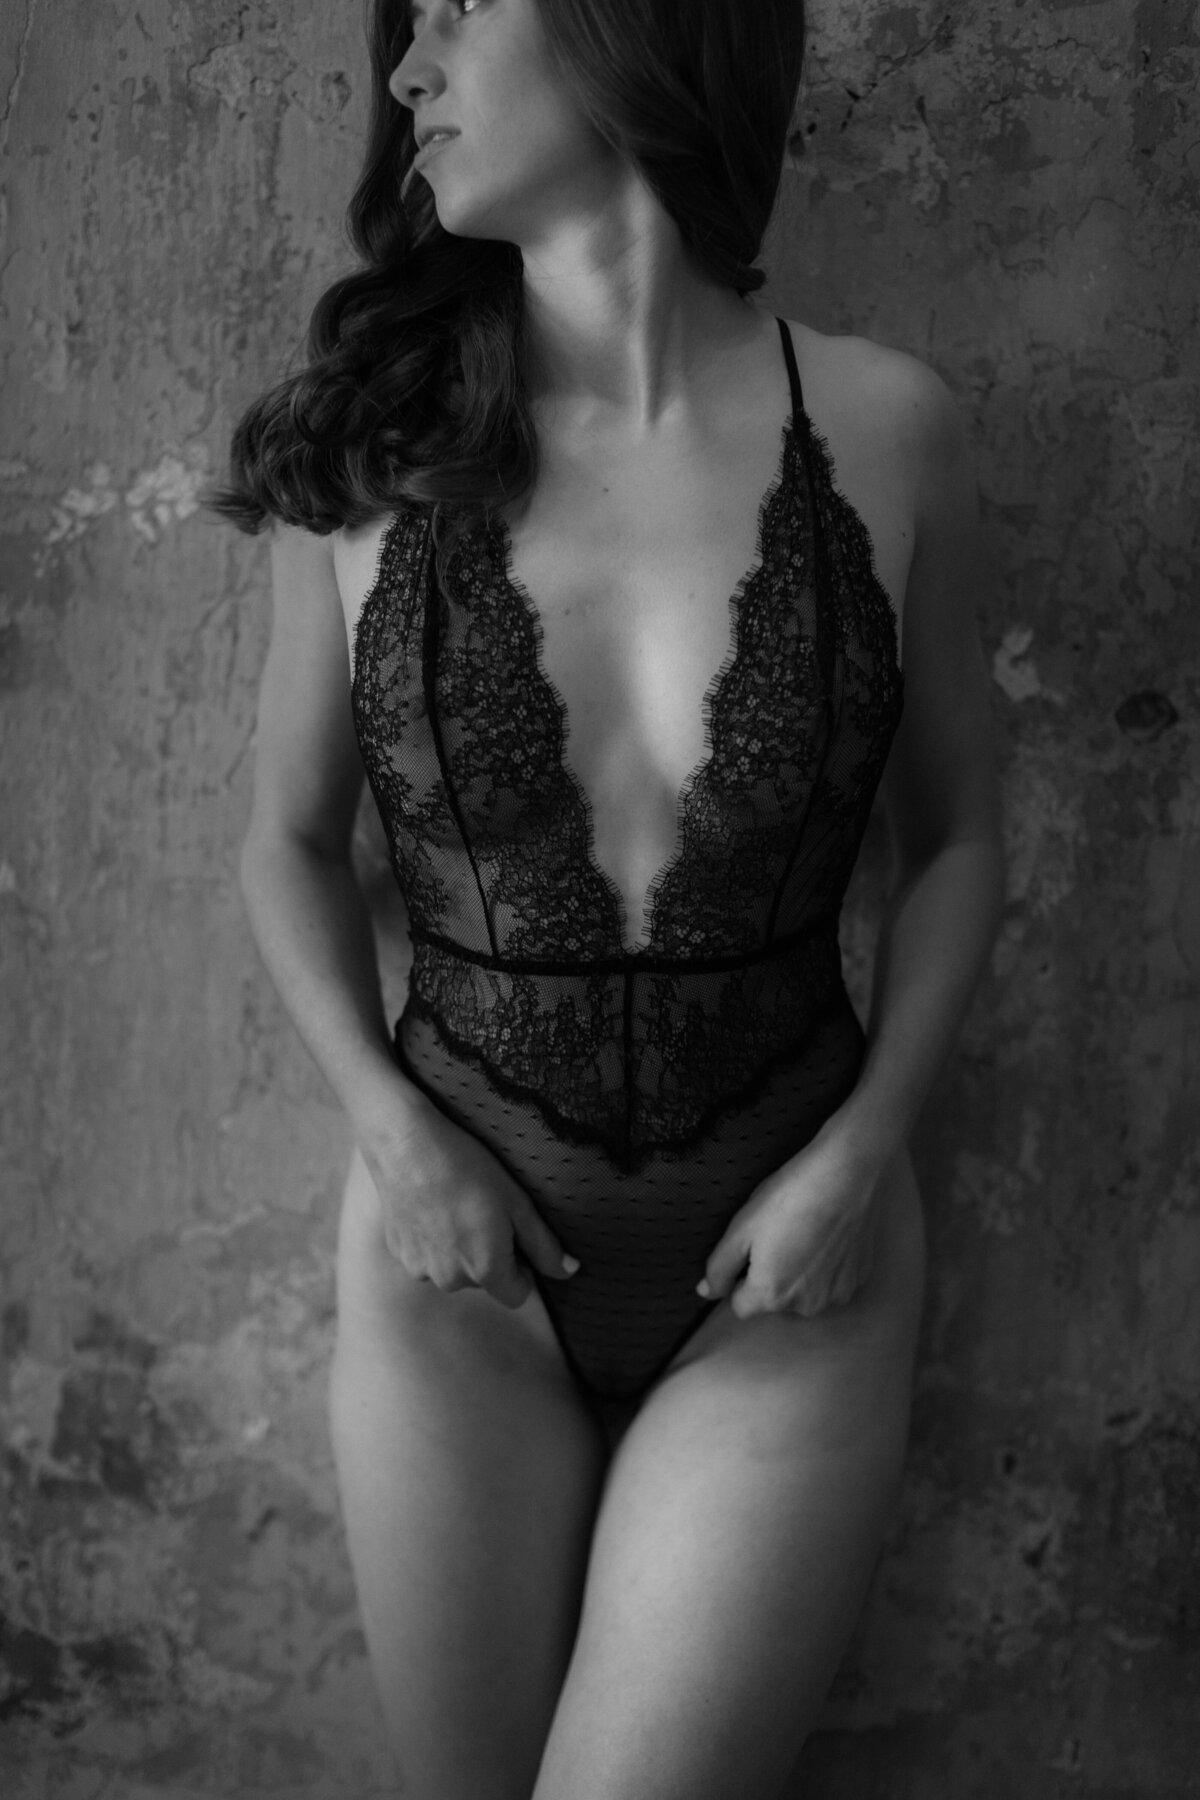 Dark_and_NMoody_Boudoir_Session_at_Maas_Building_Philadelphia_with_Ultimate_Edge_Photography-2